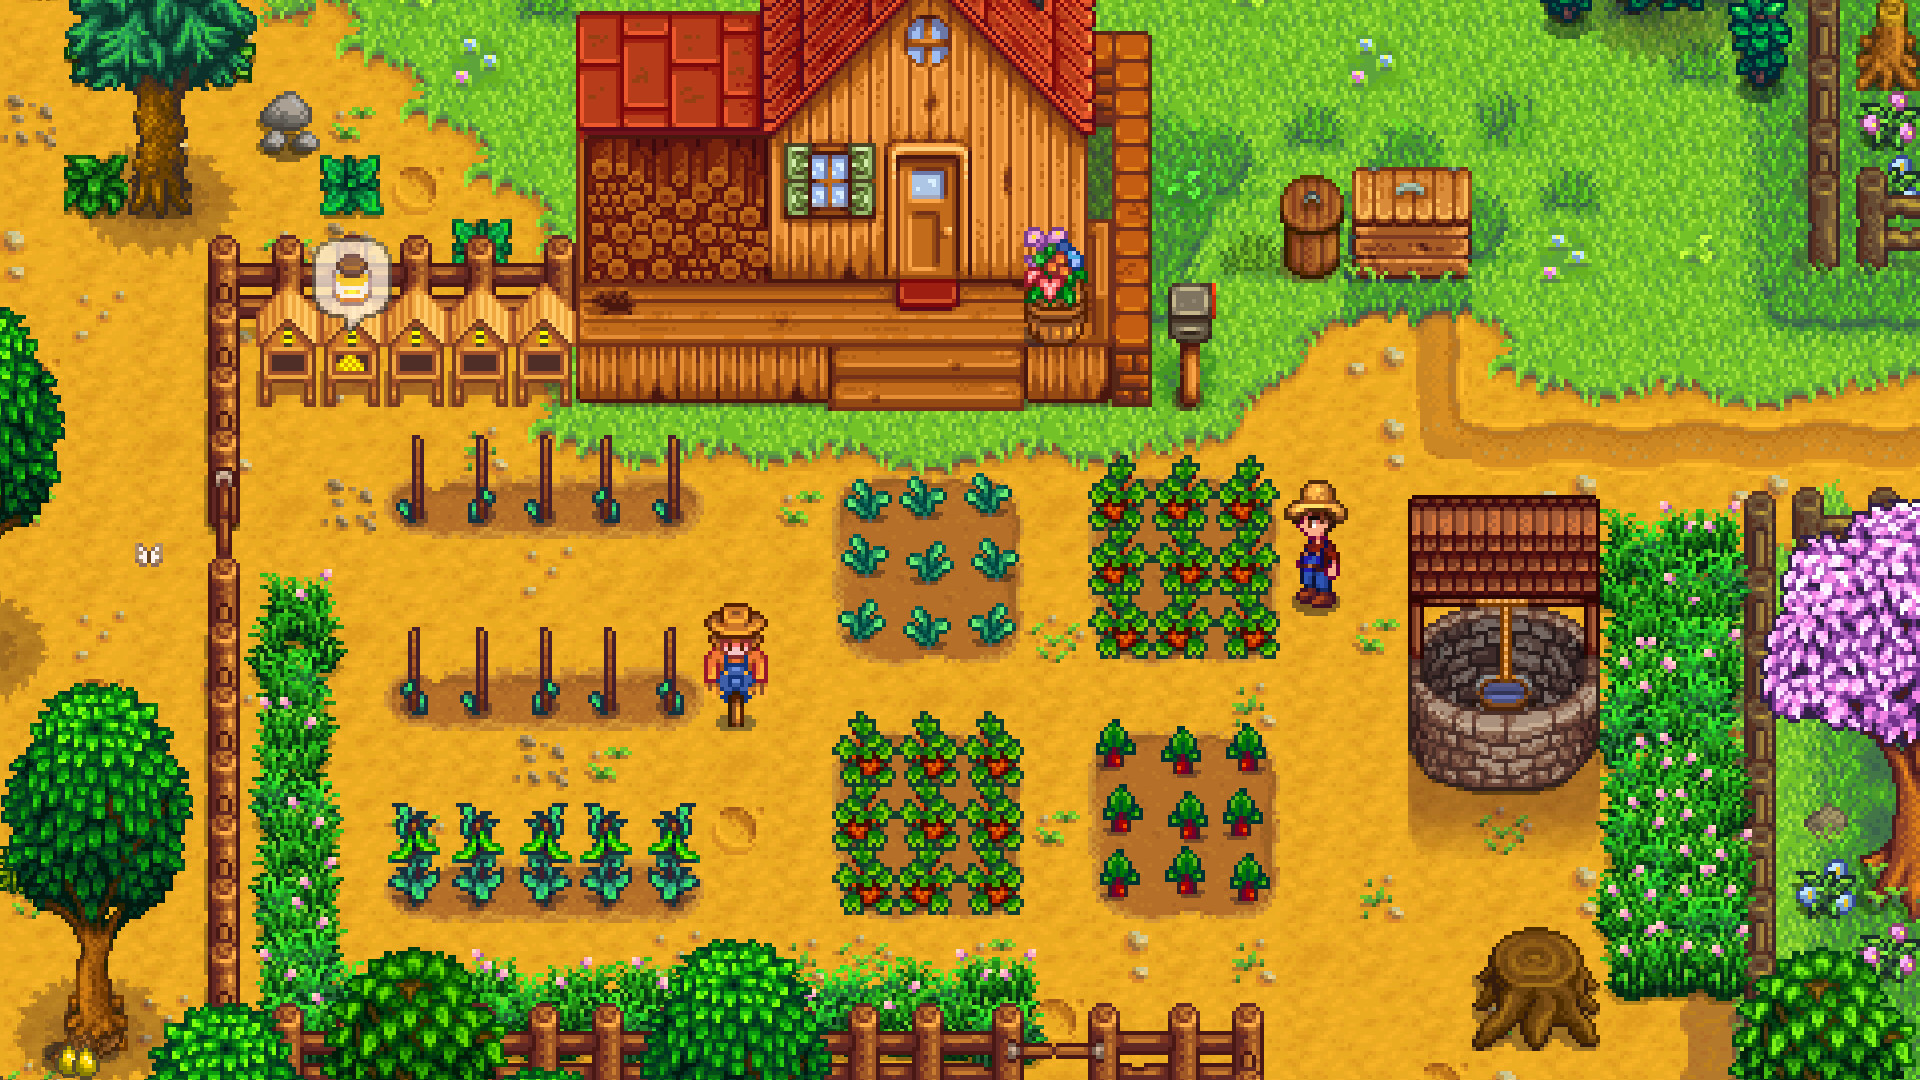 Stardew Valley gets a “minor update” to fix some long-standing bugs